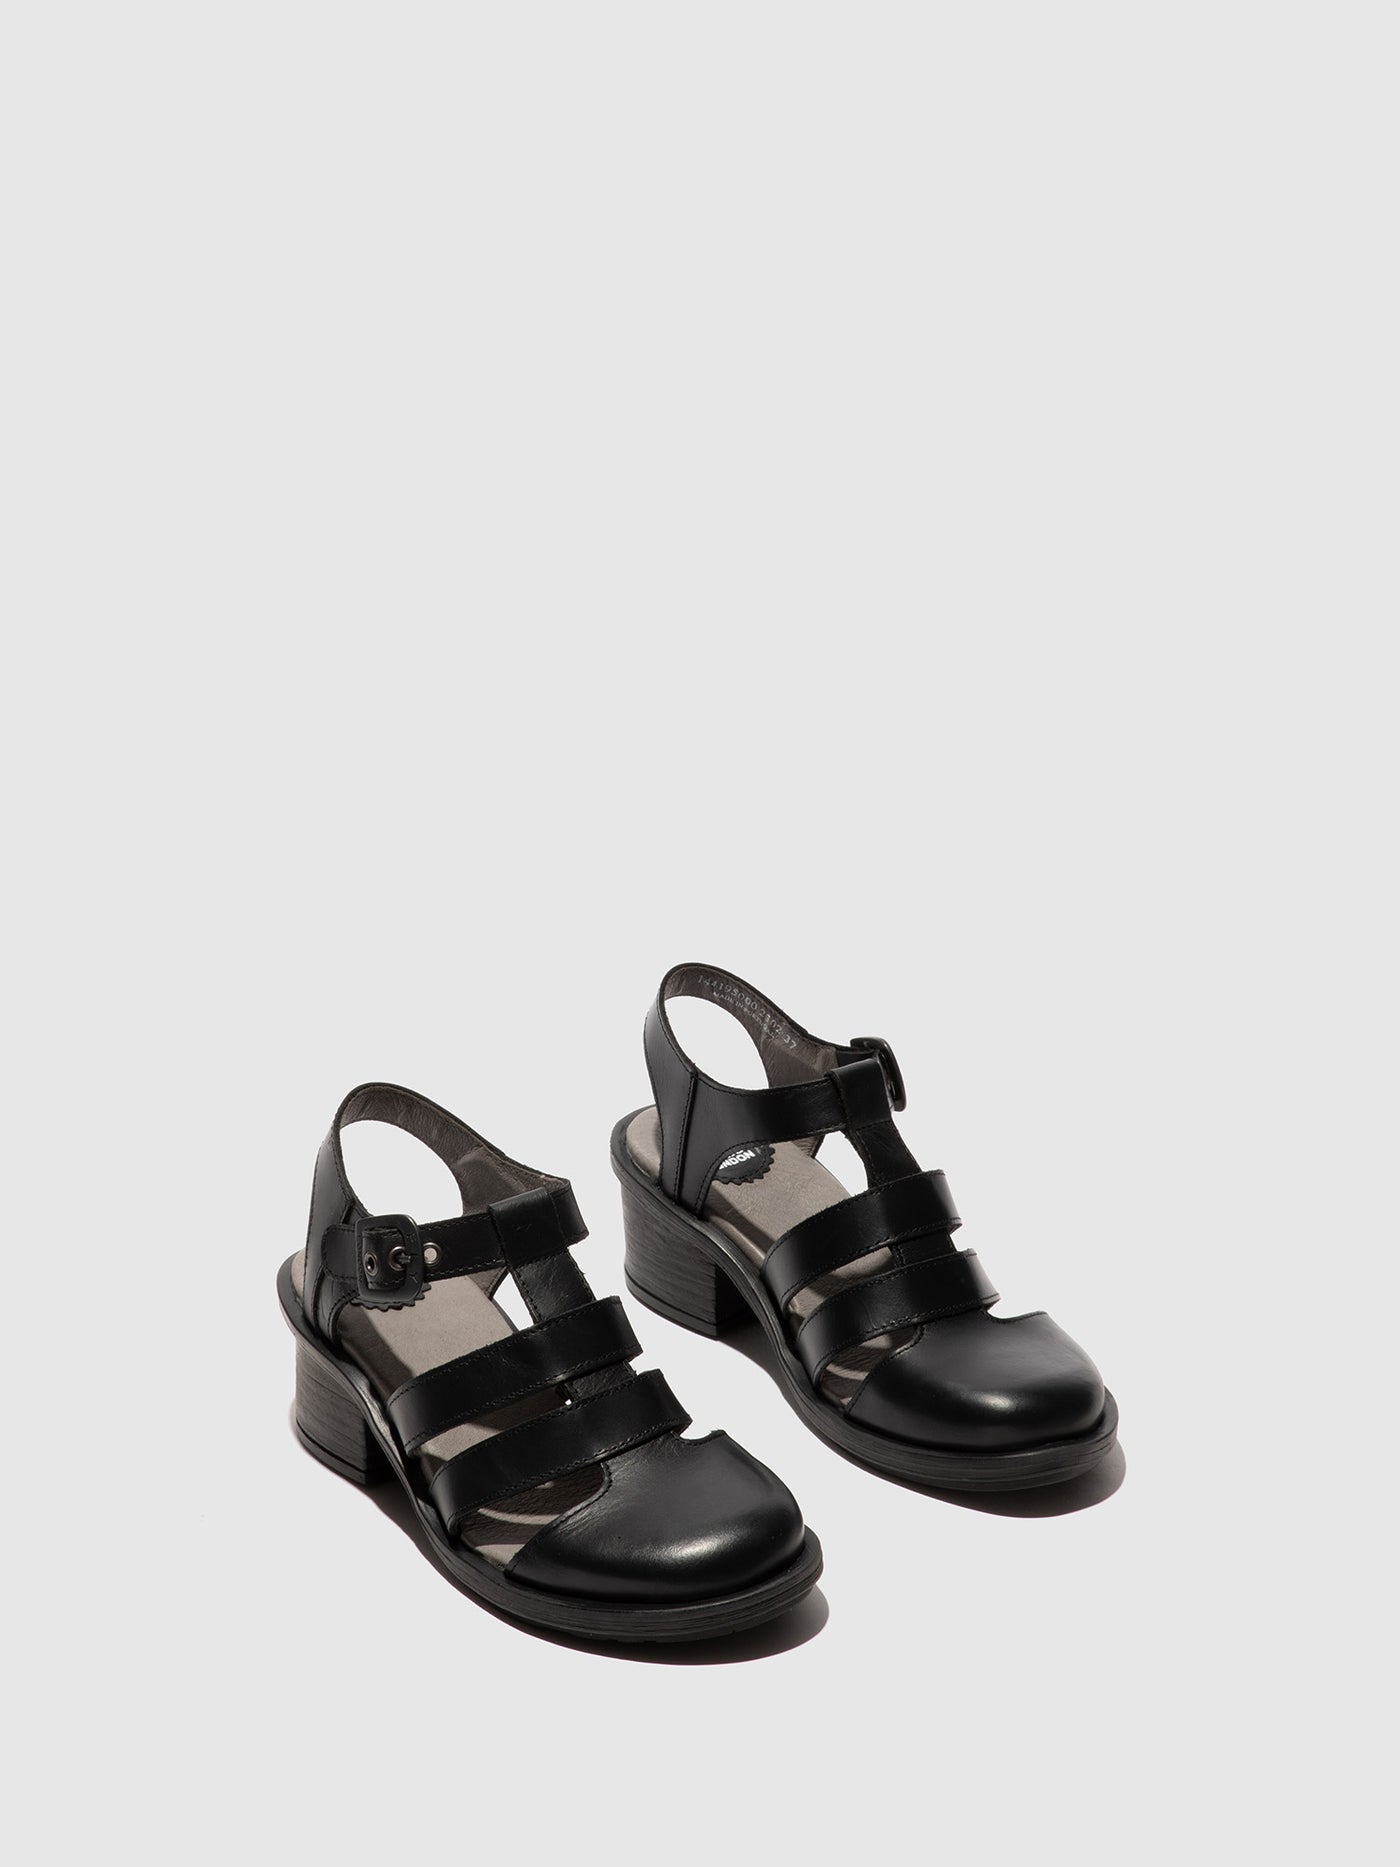 T-Strap Sandals CAHY195FLY BLACK